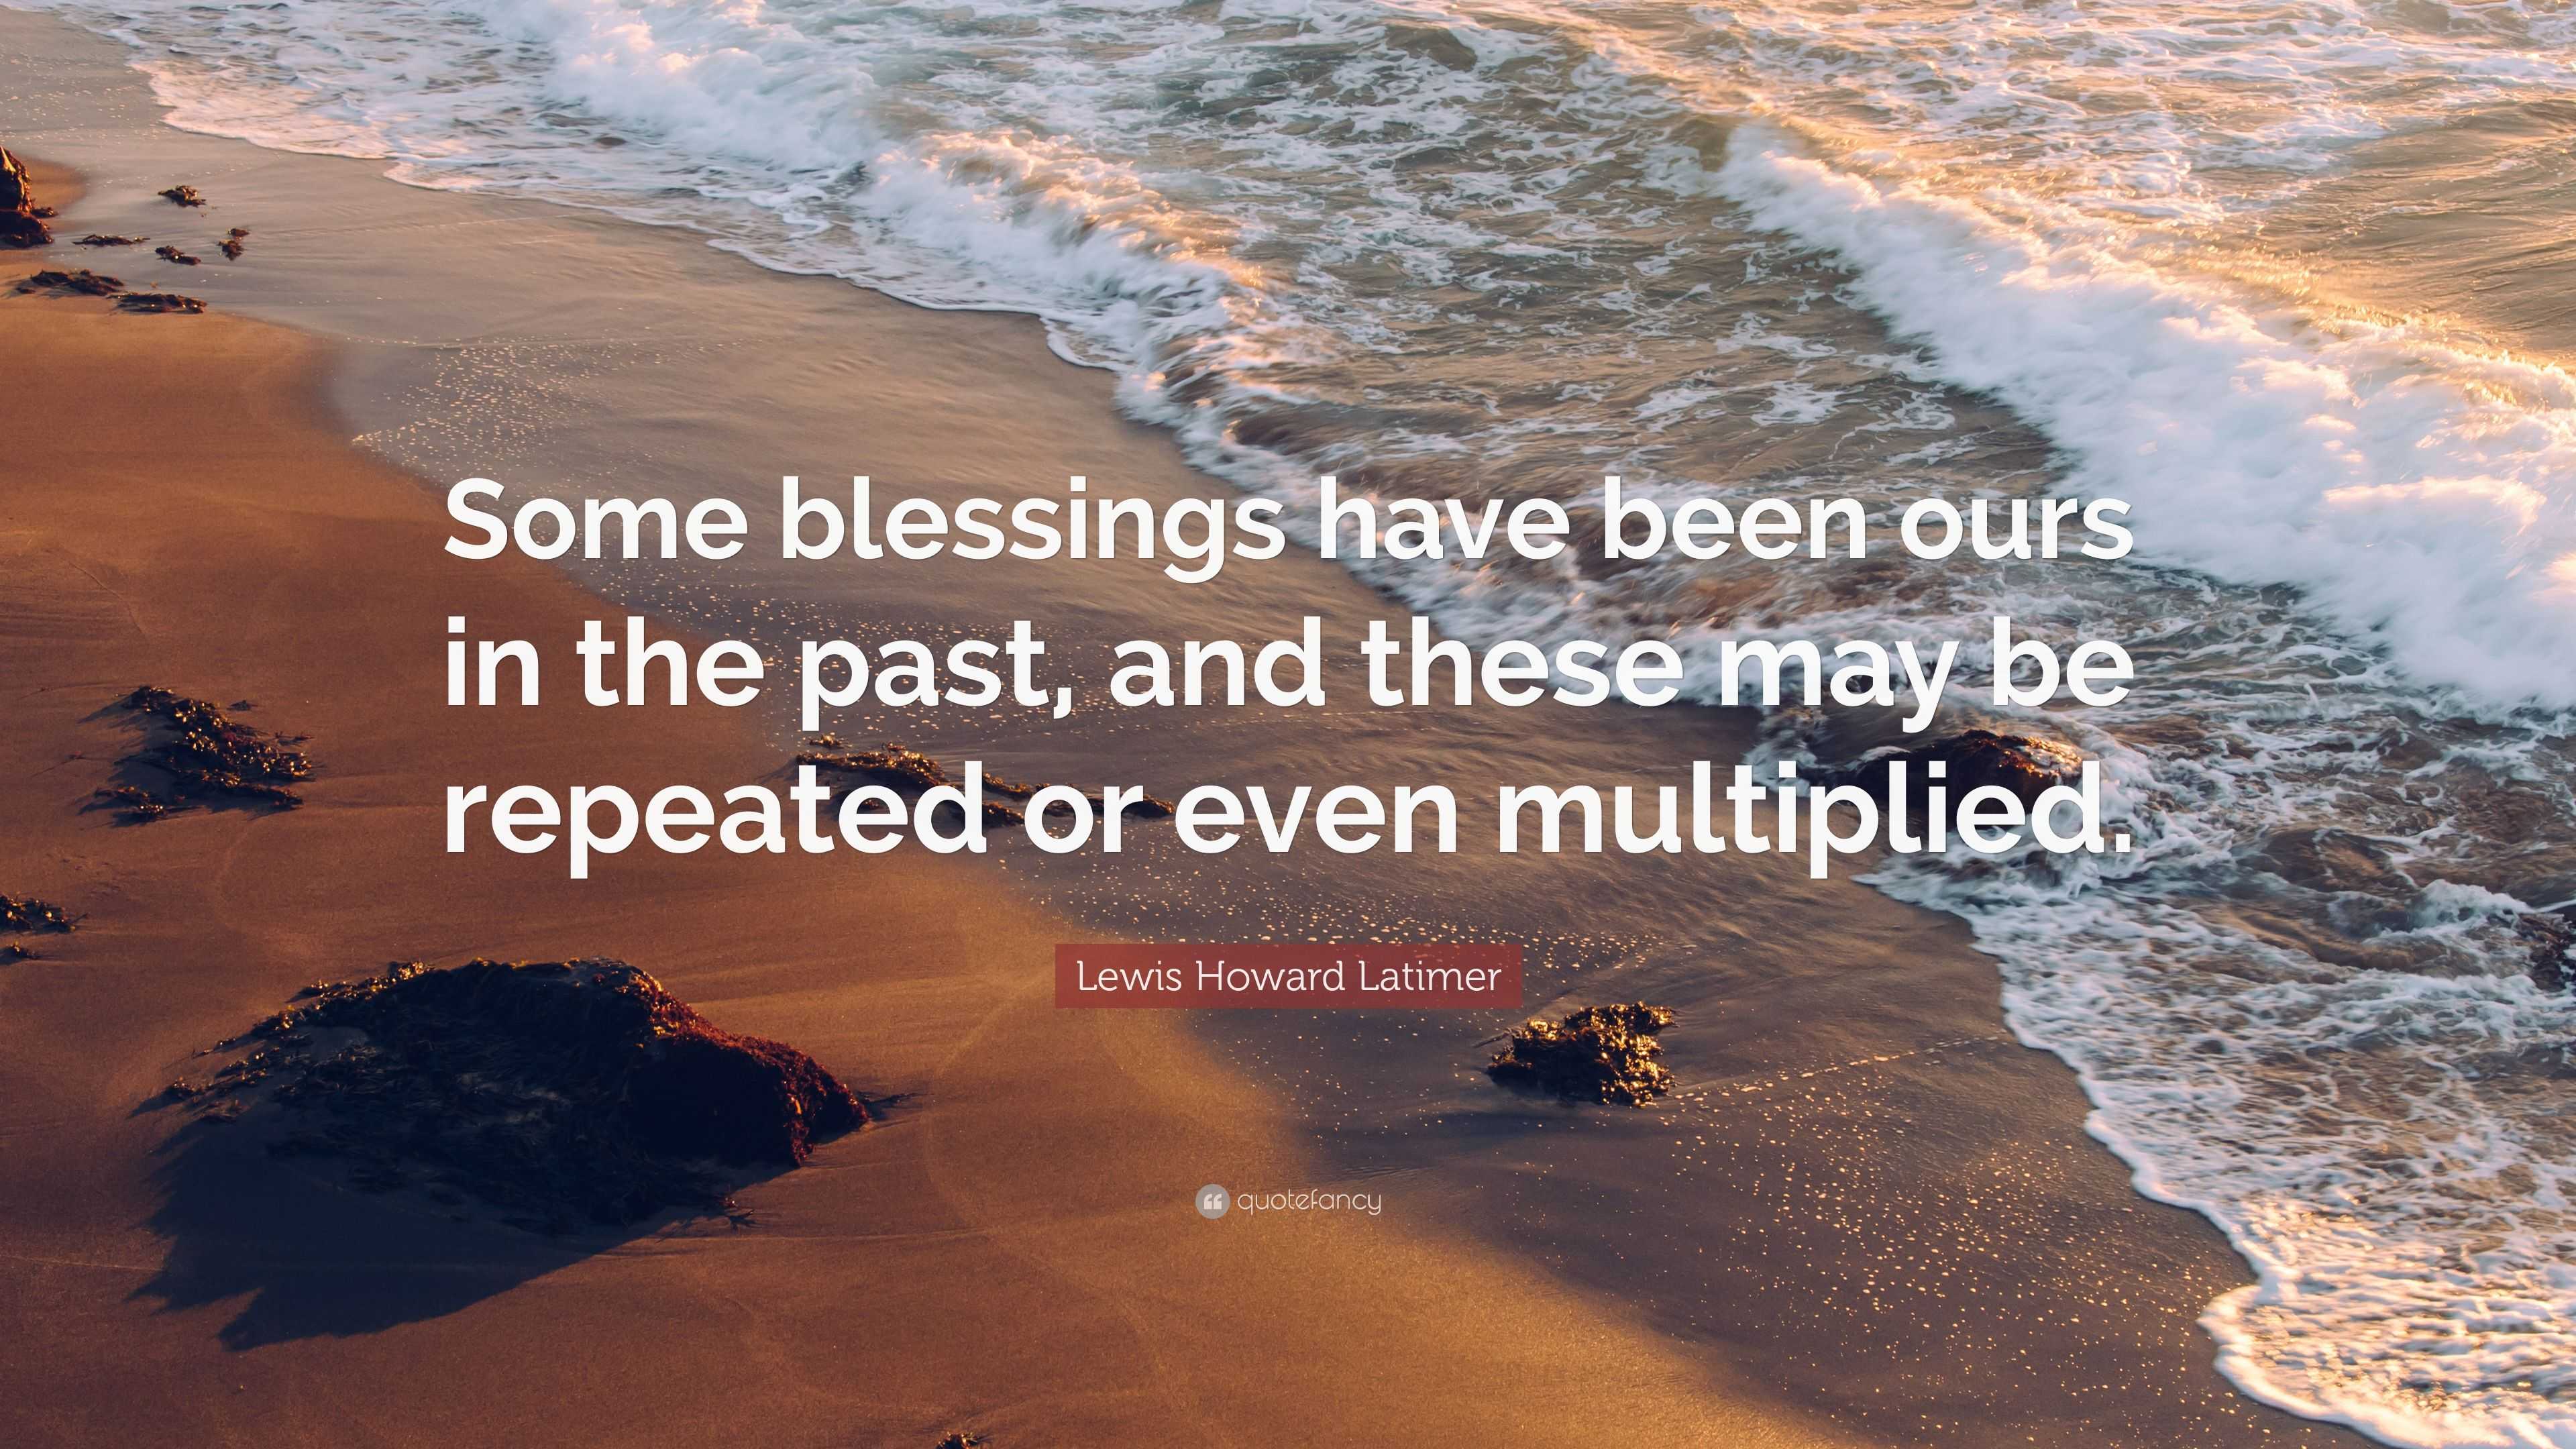 Lewis Howard Latimer Quote “some Blessings Have Been Ours In The Past